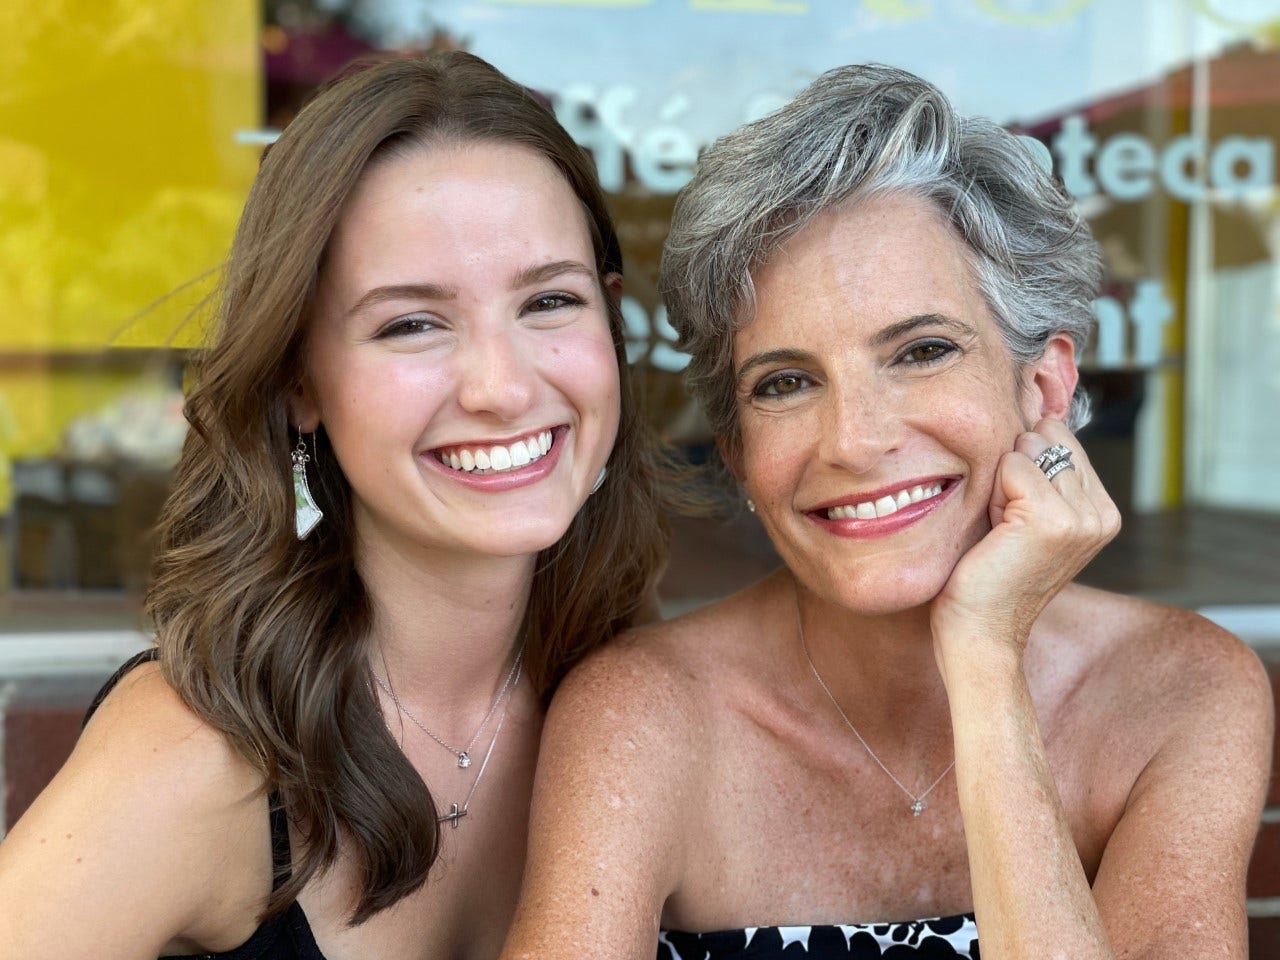 Kate Obenshain: 12 steps to raising a conservative daughter – from my very wise daughter